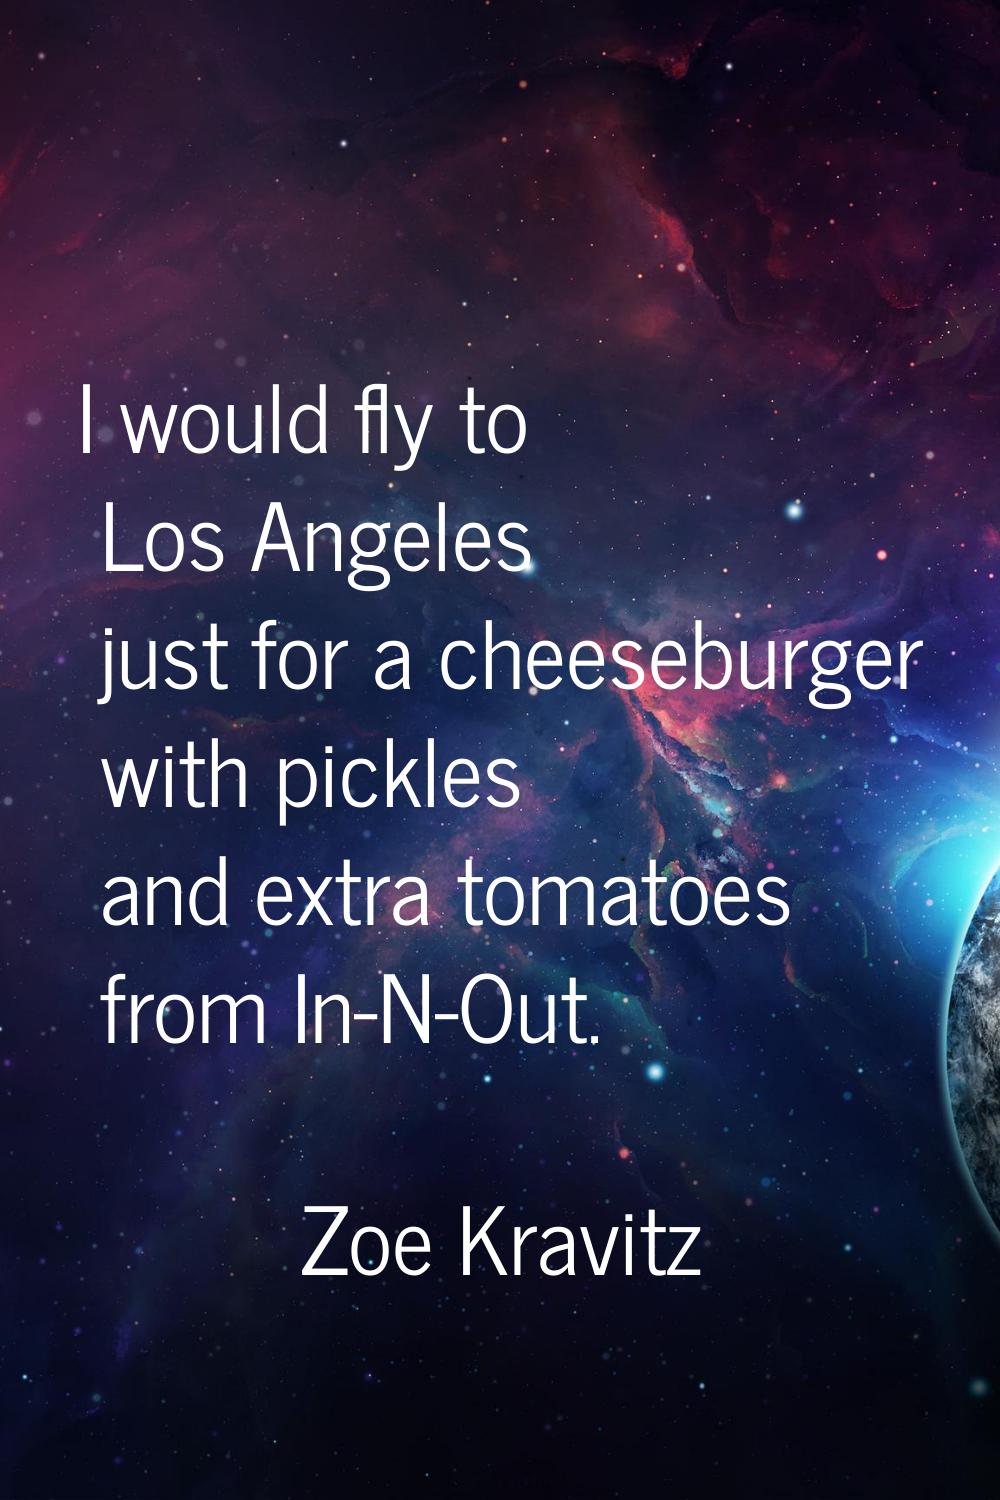 I would fly to Los Angeles just for a cheeseburger with pickles and extra tomatoes from In-N-Out.